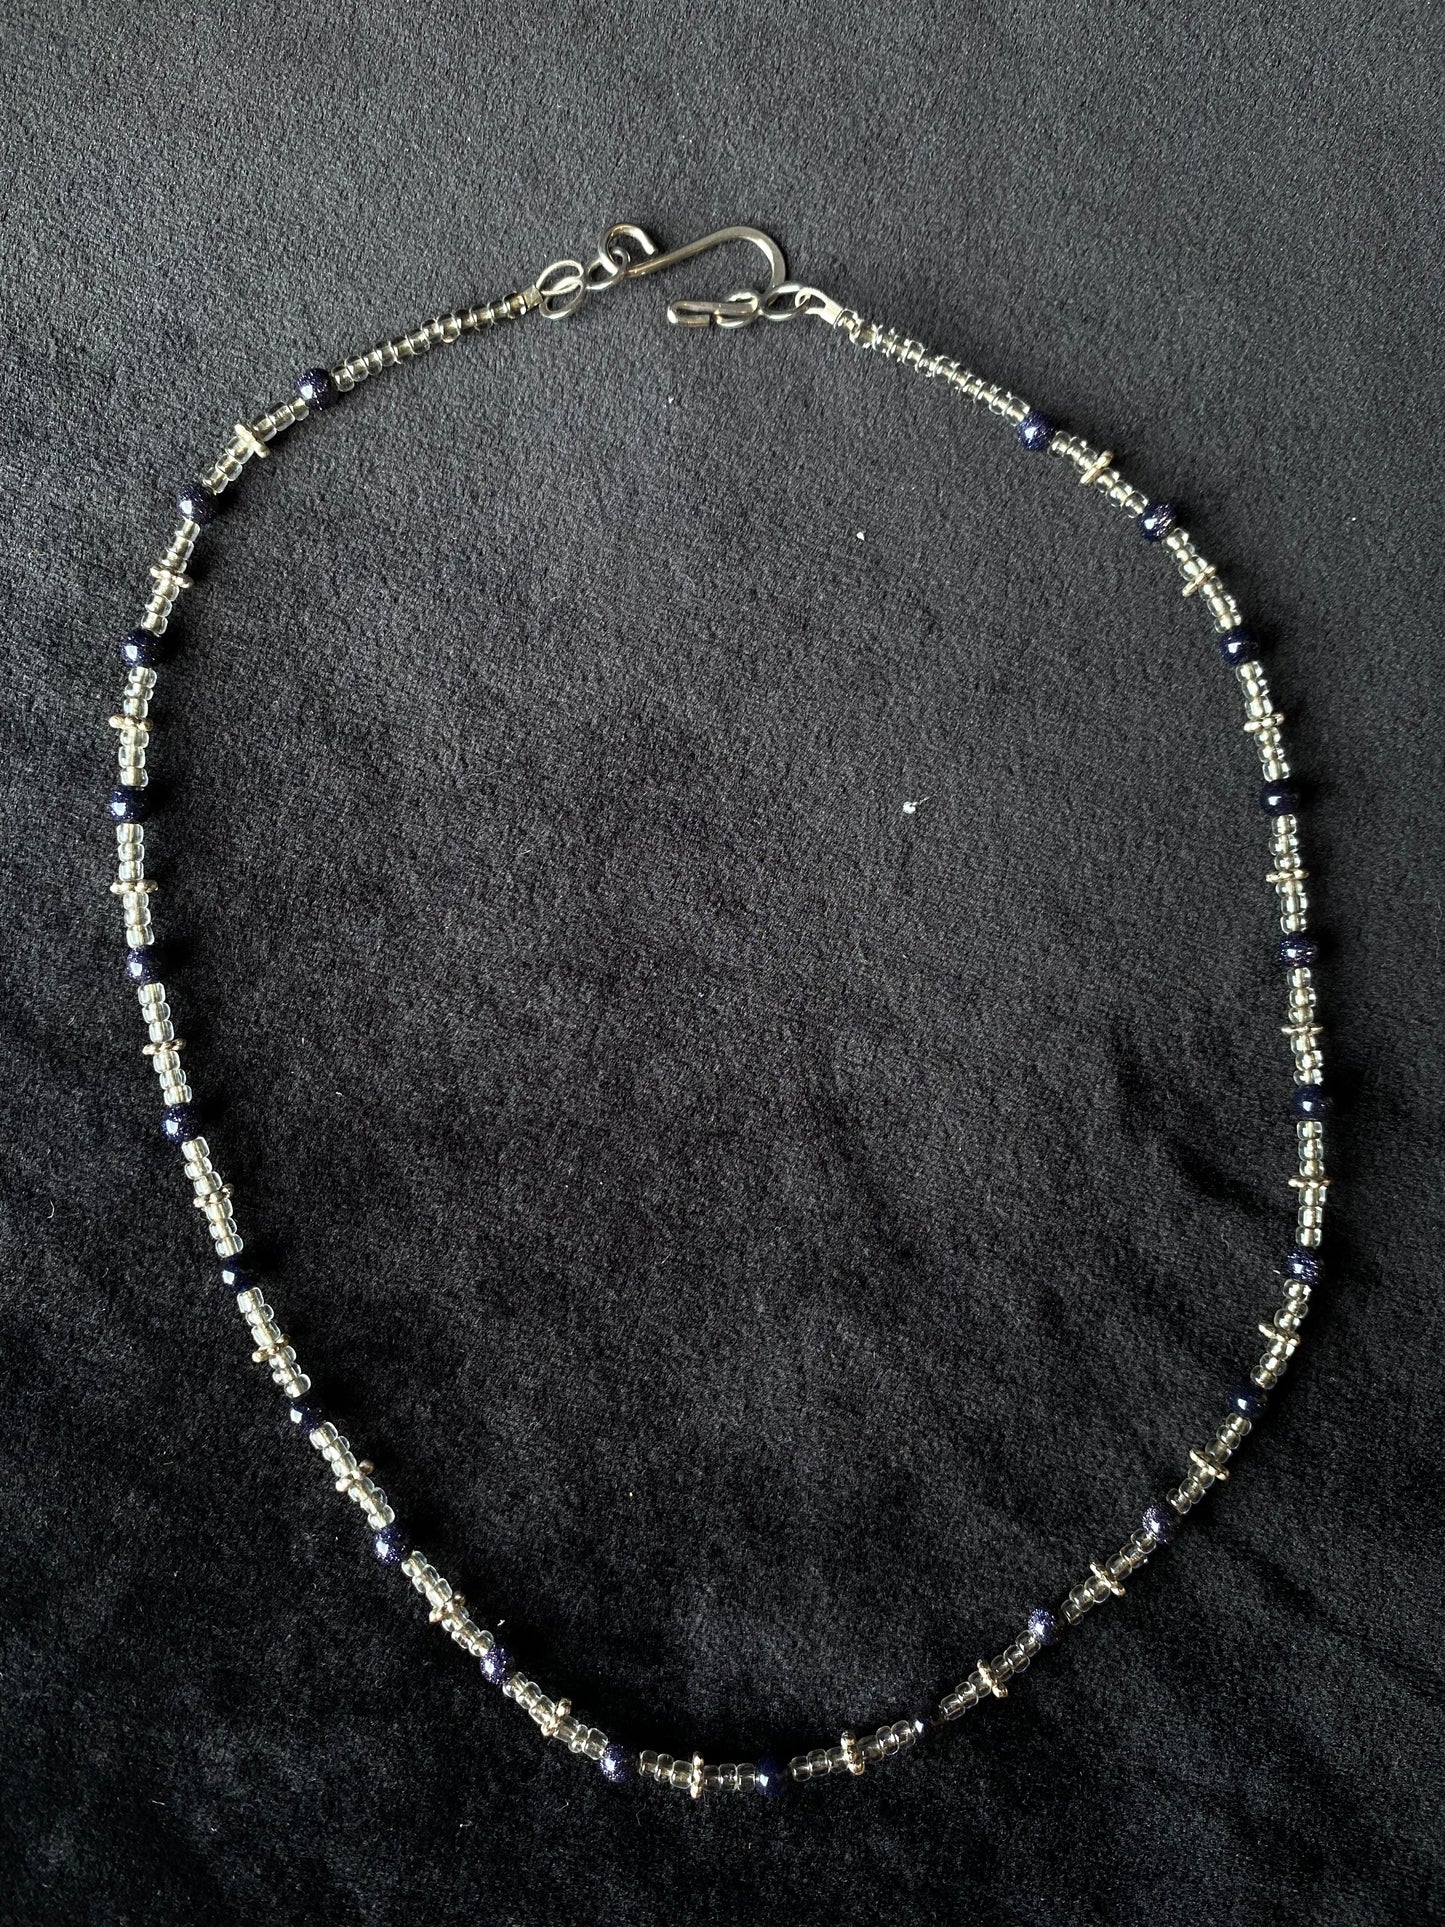 Beaded black and clear necklace